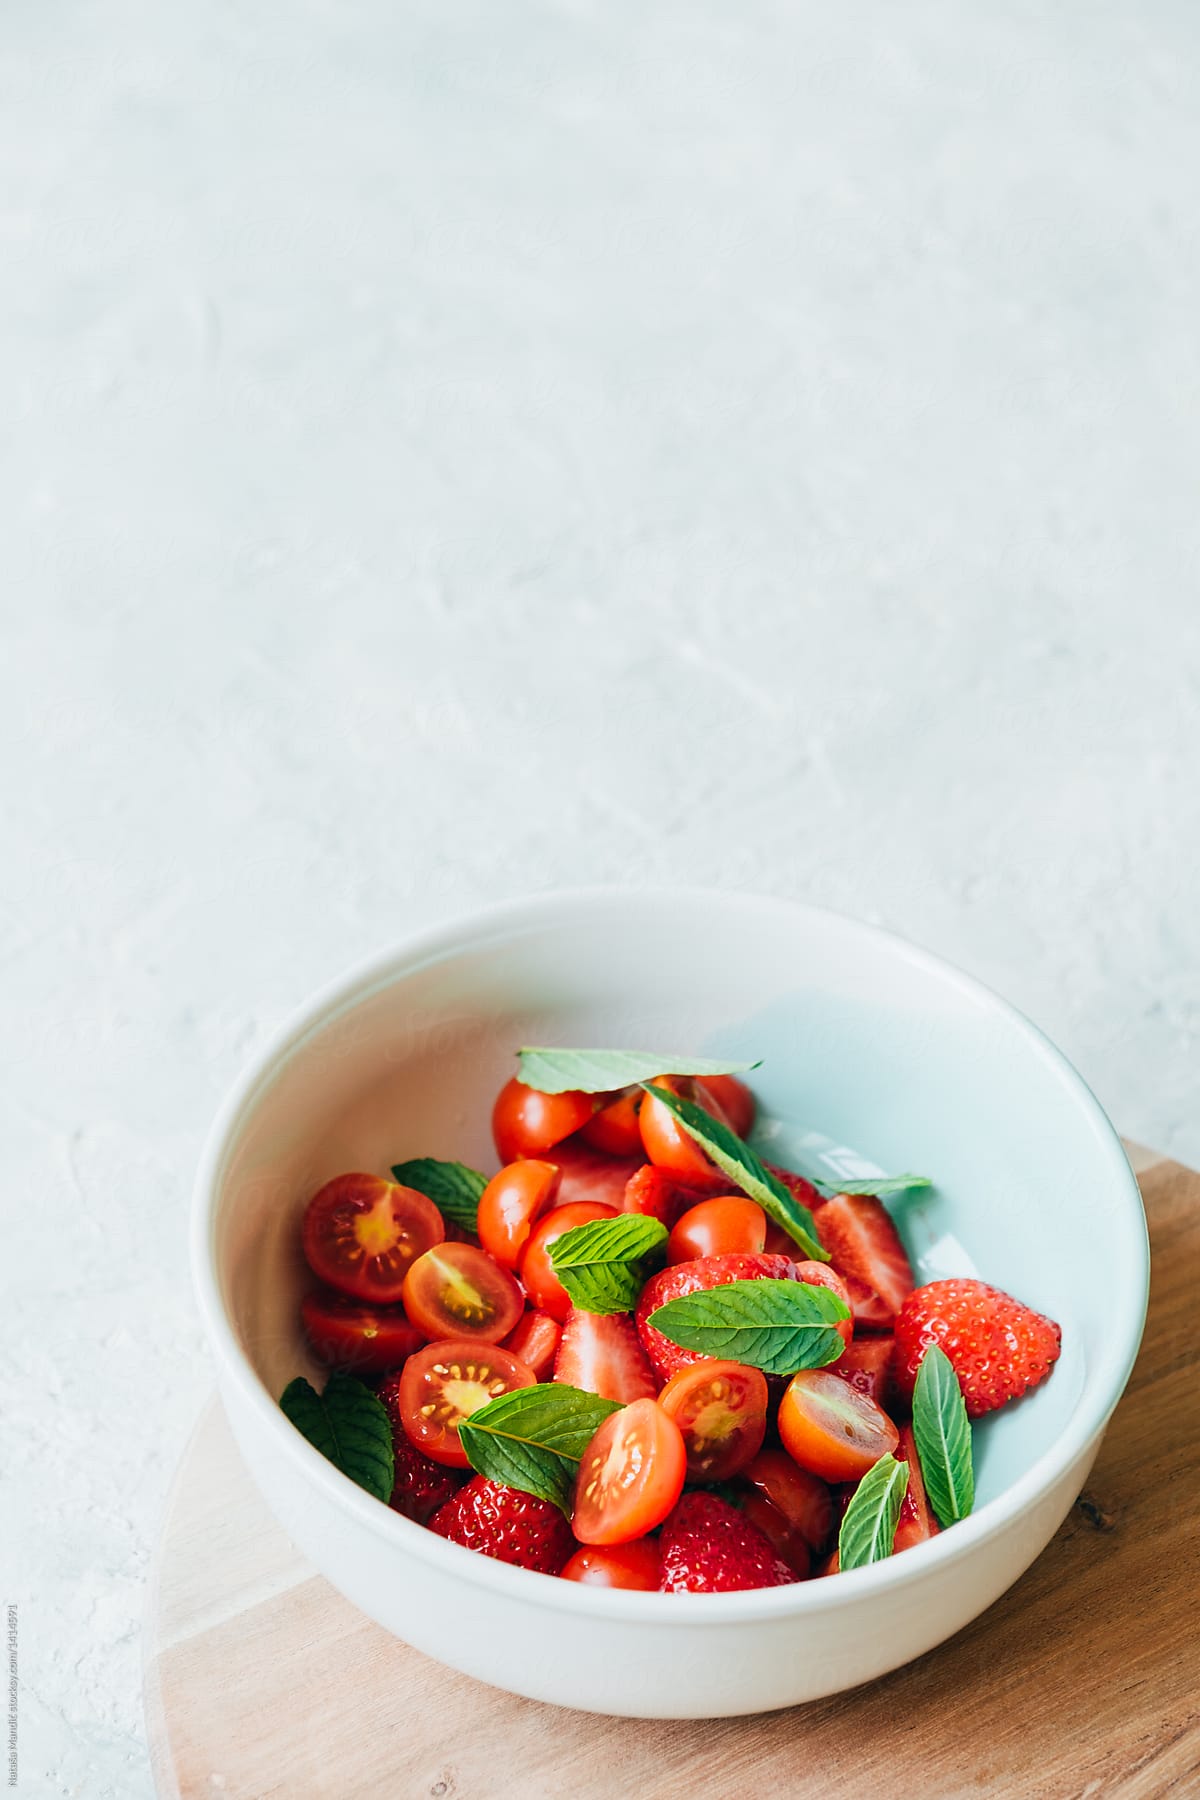 Strawberry and cherry tomato salad with mint